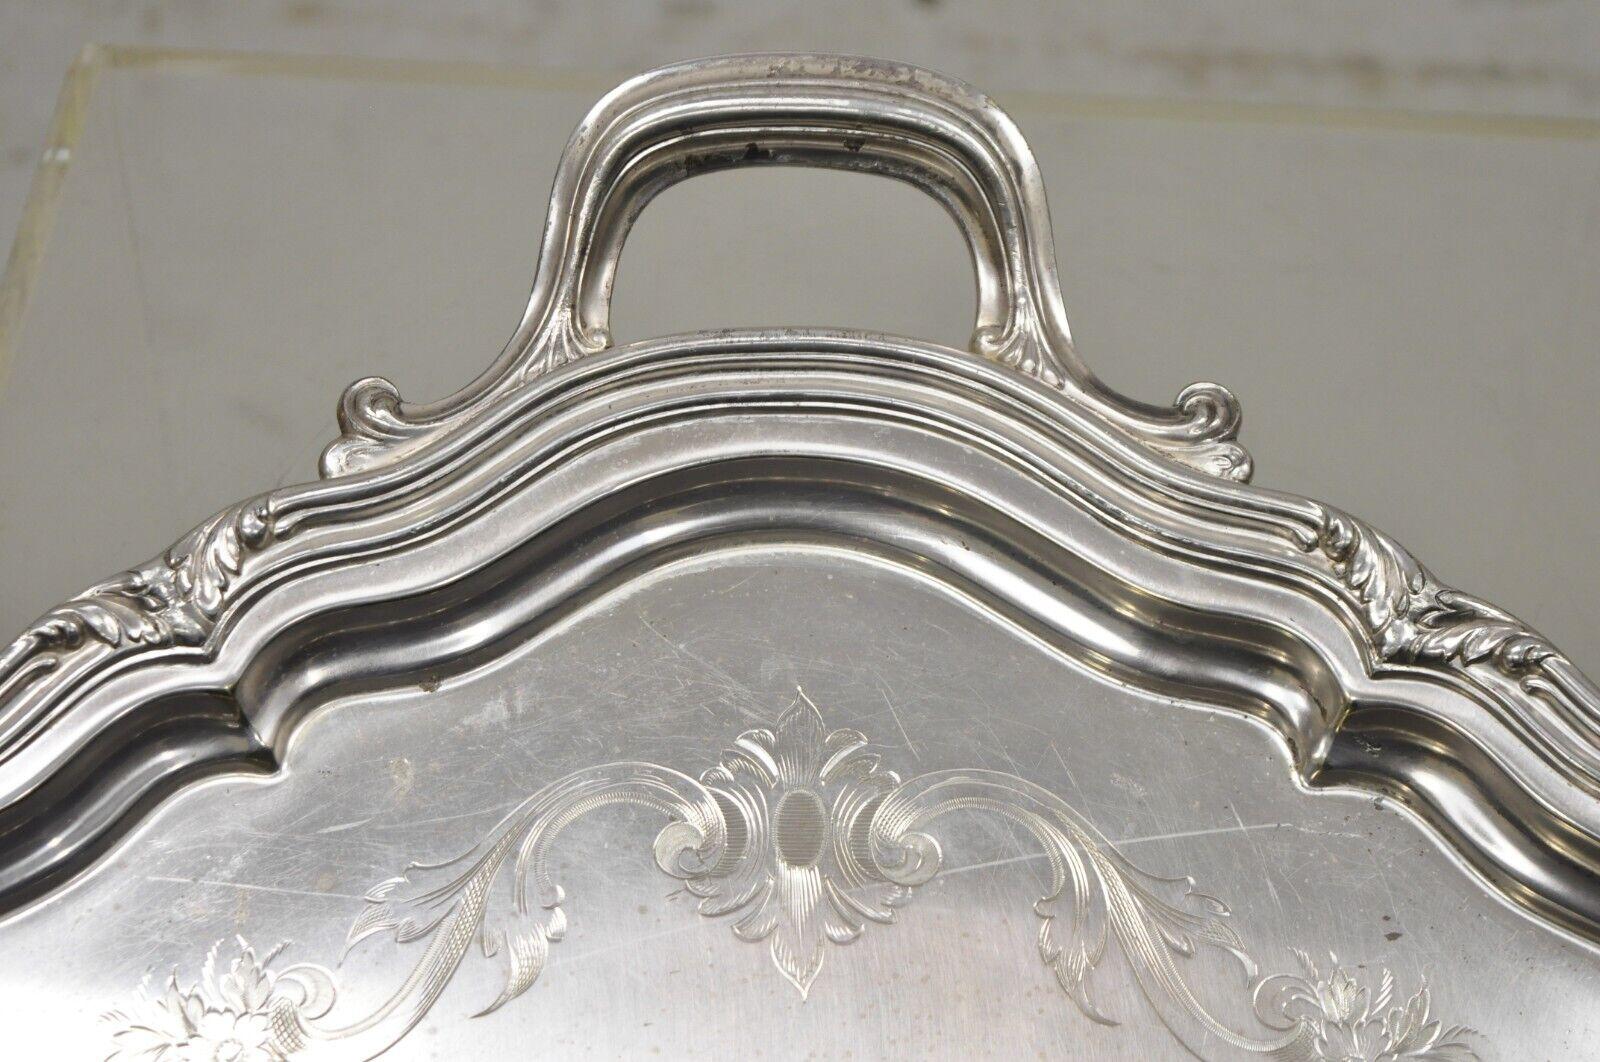 20th Century Antique Reed & Barton EPNS 06143 Silver Plated Handle Tray Serving Platter